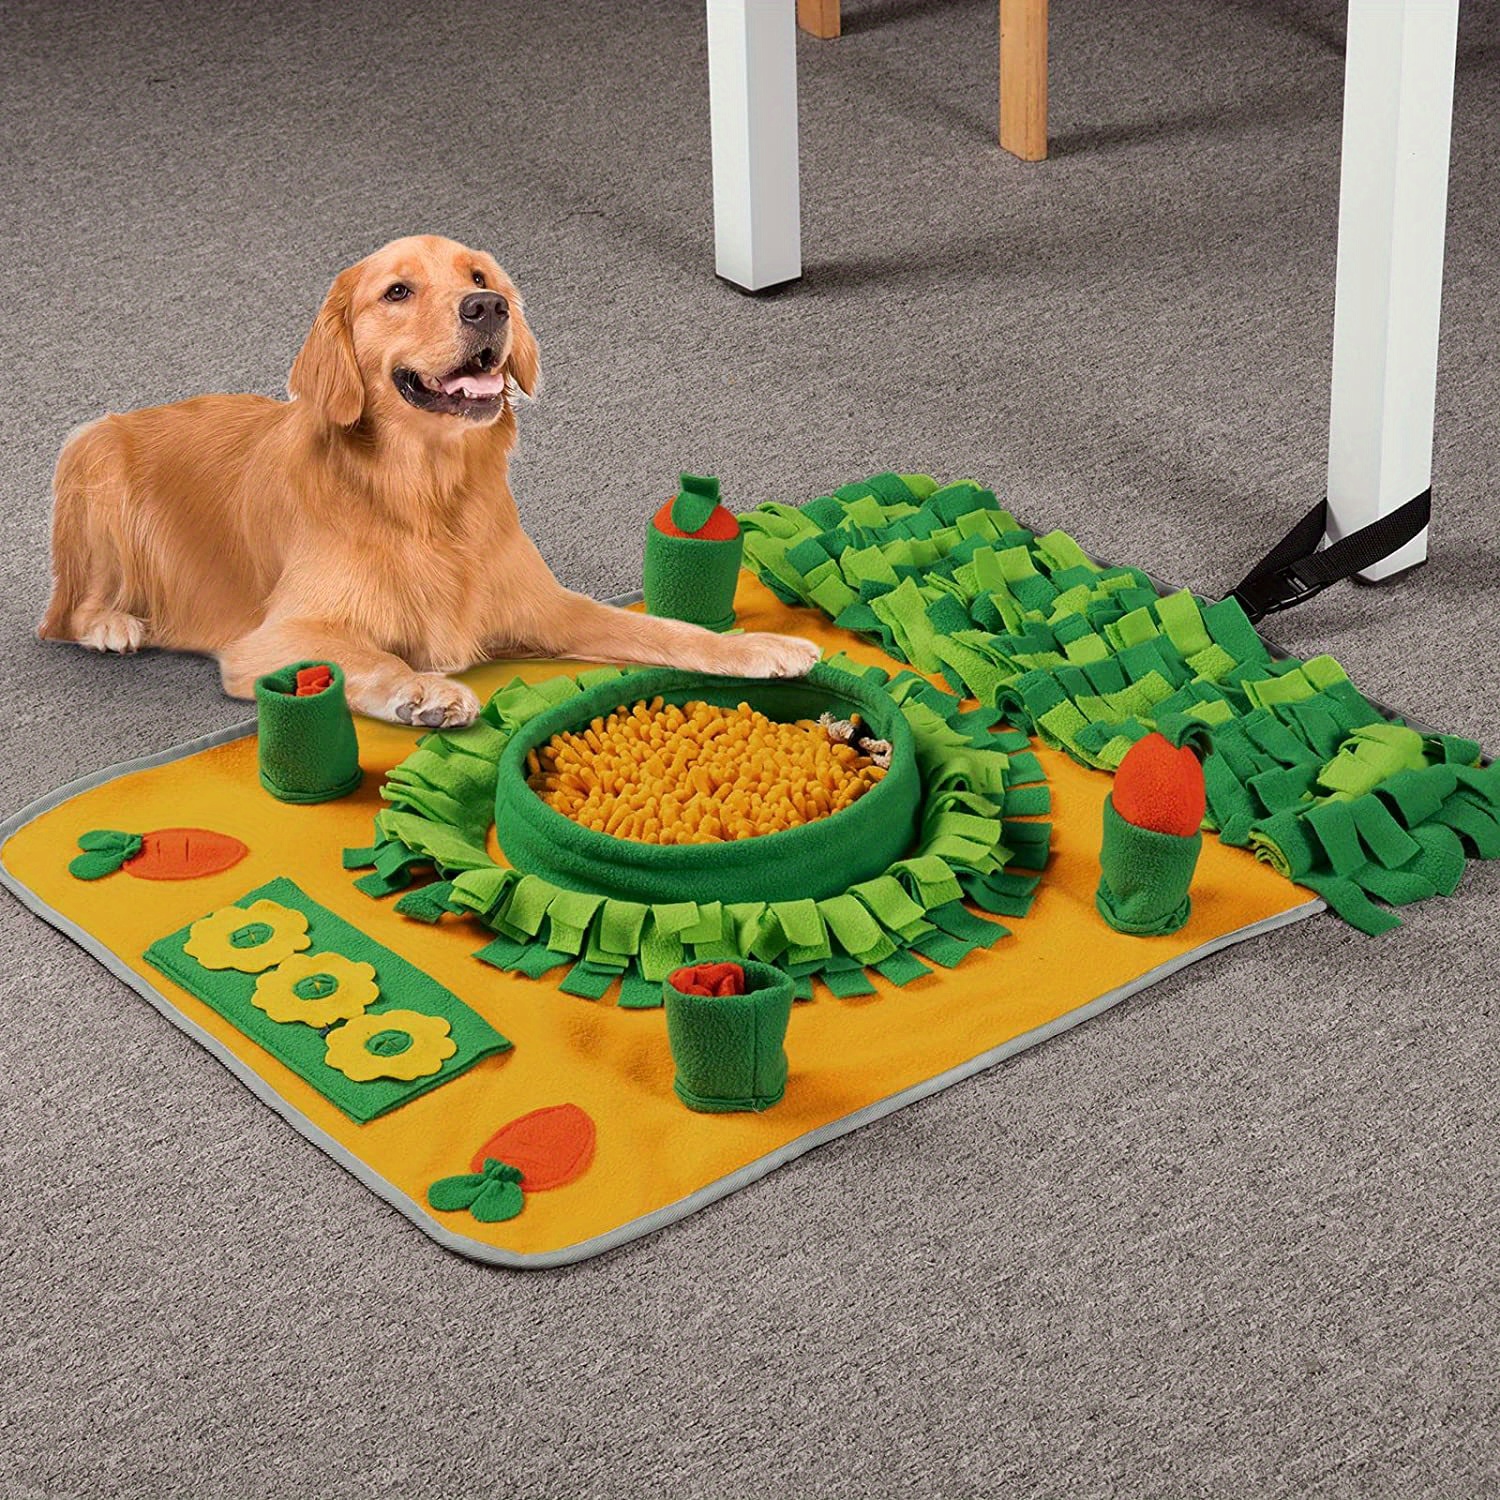 Snuffle Mat for Dogs, Nobleza Sniff Mat for Dogs to Encourage Natural  Foraging Skills, Interactive Training Slow Feeding Dog Sniffing Mat Puzzle  for